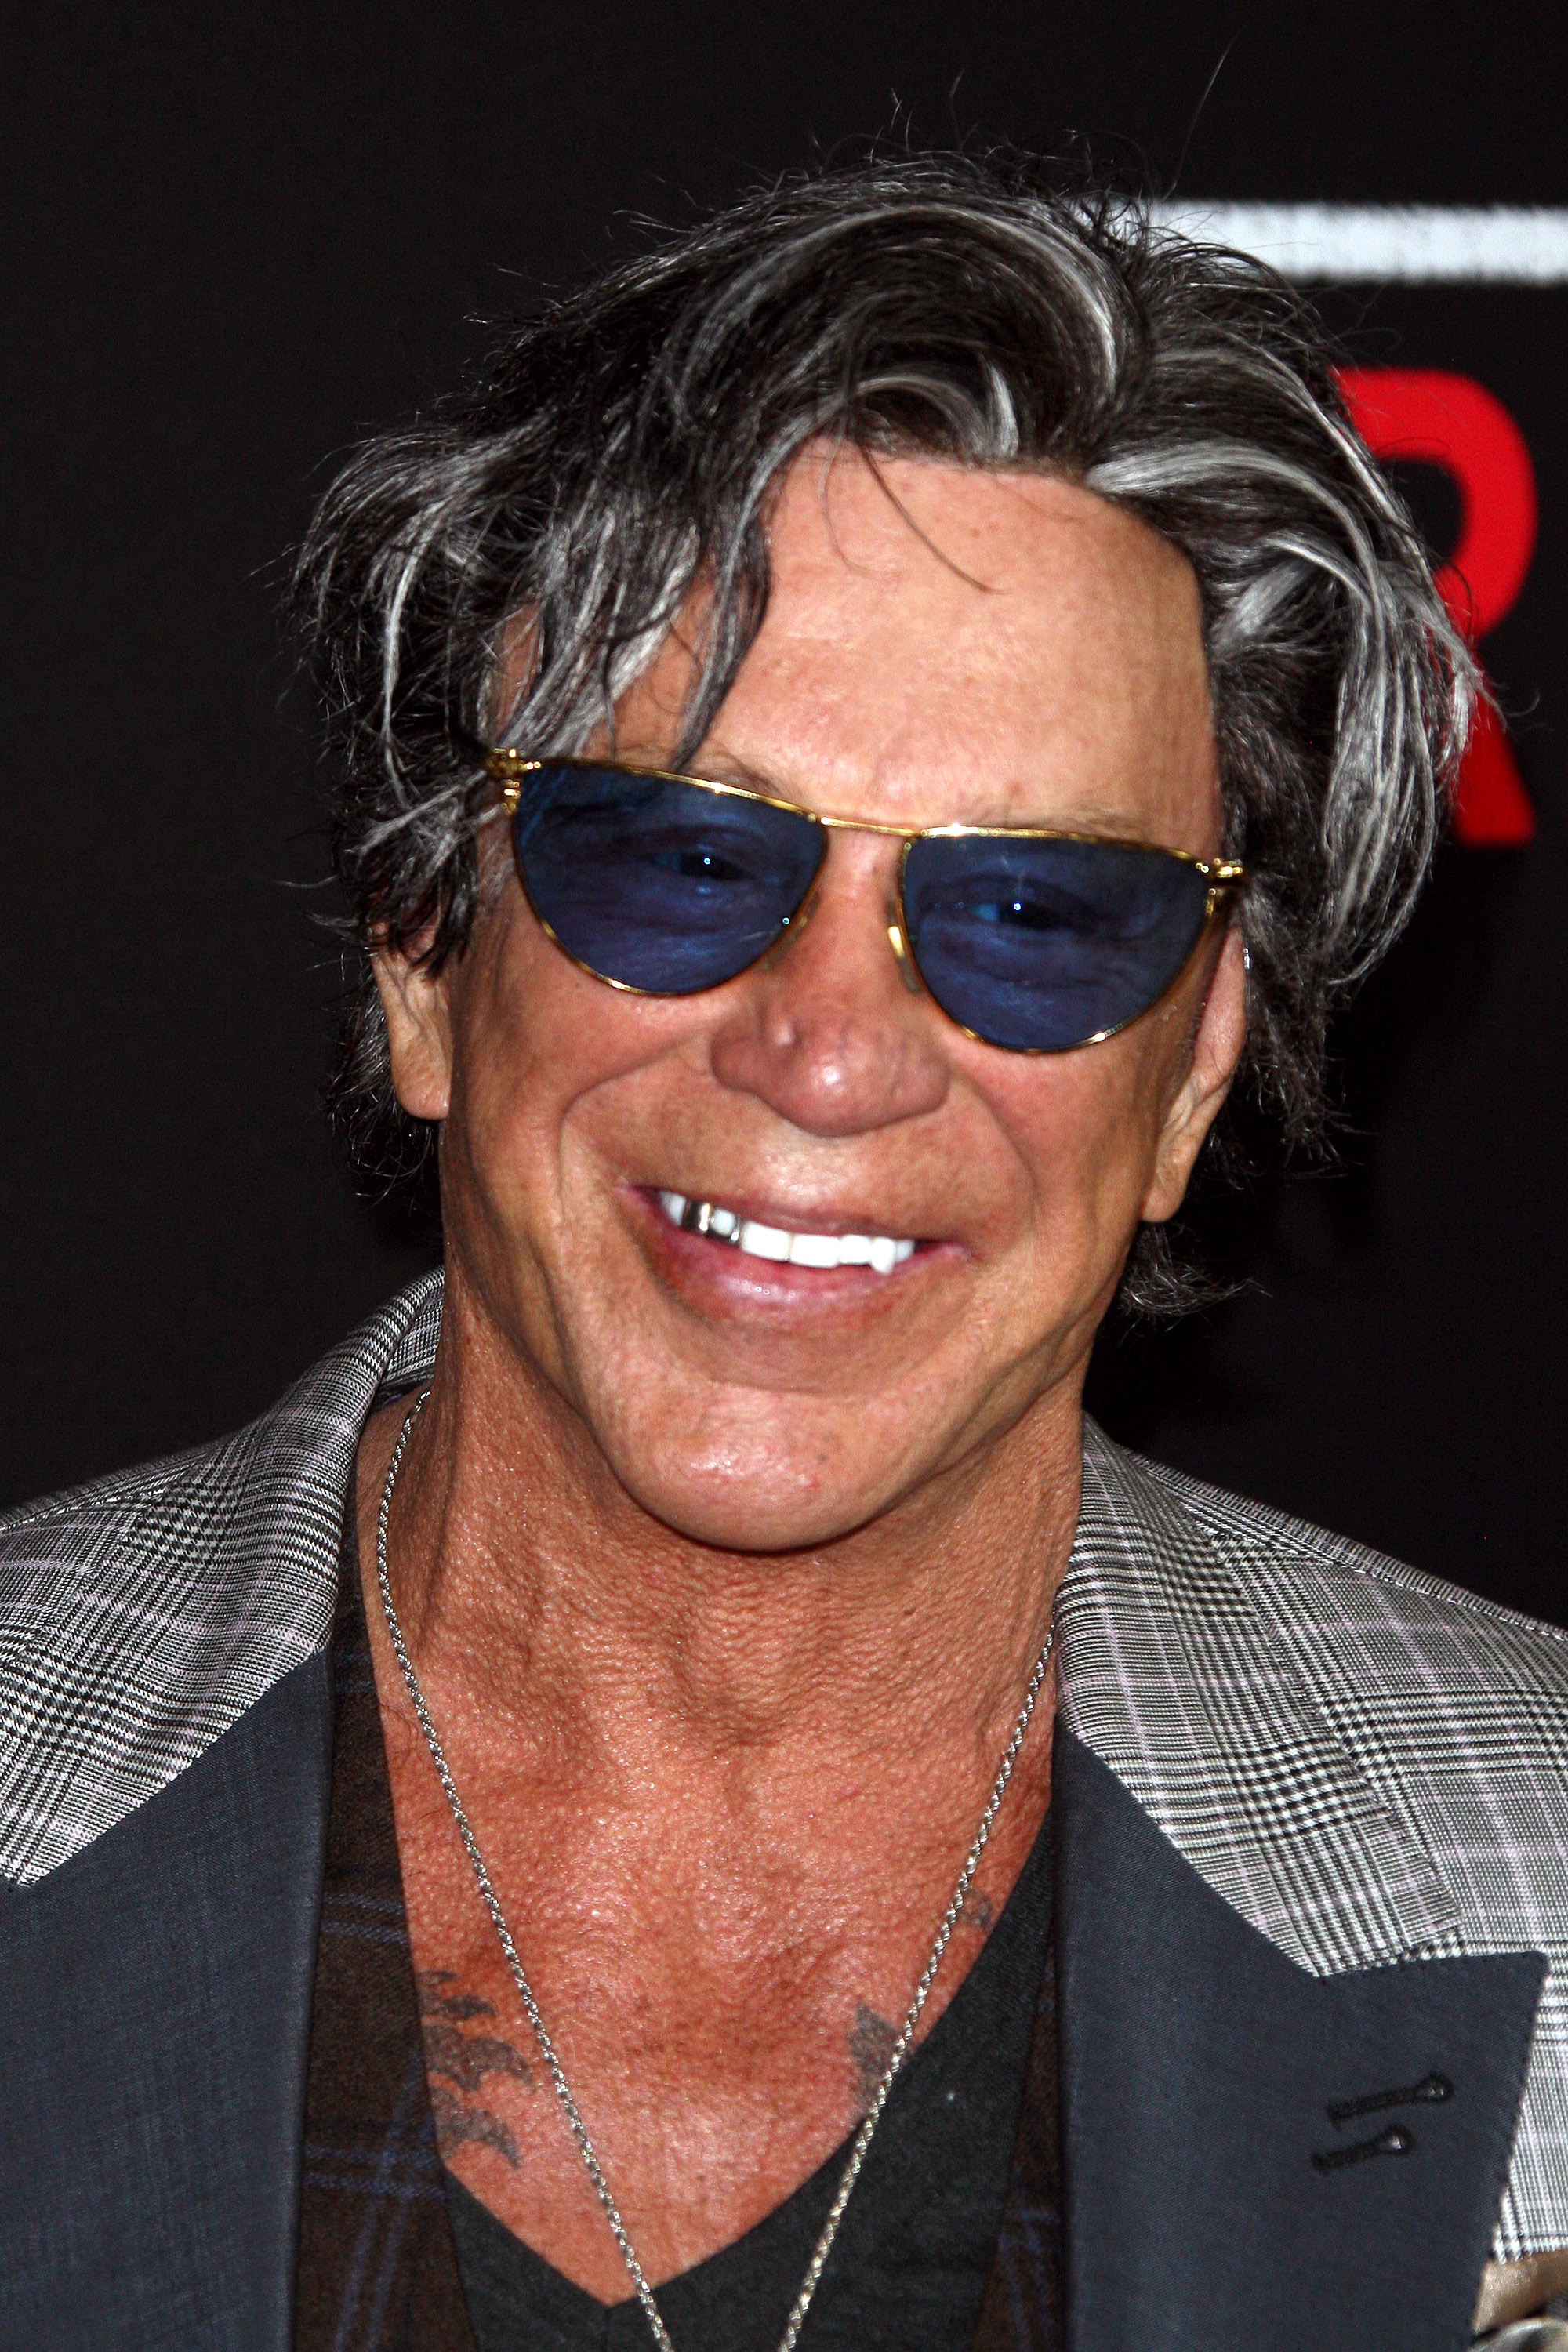 Mickey Rourke at the premiere of "Triple 9," 2016 | Source: Getty Images